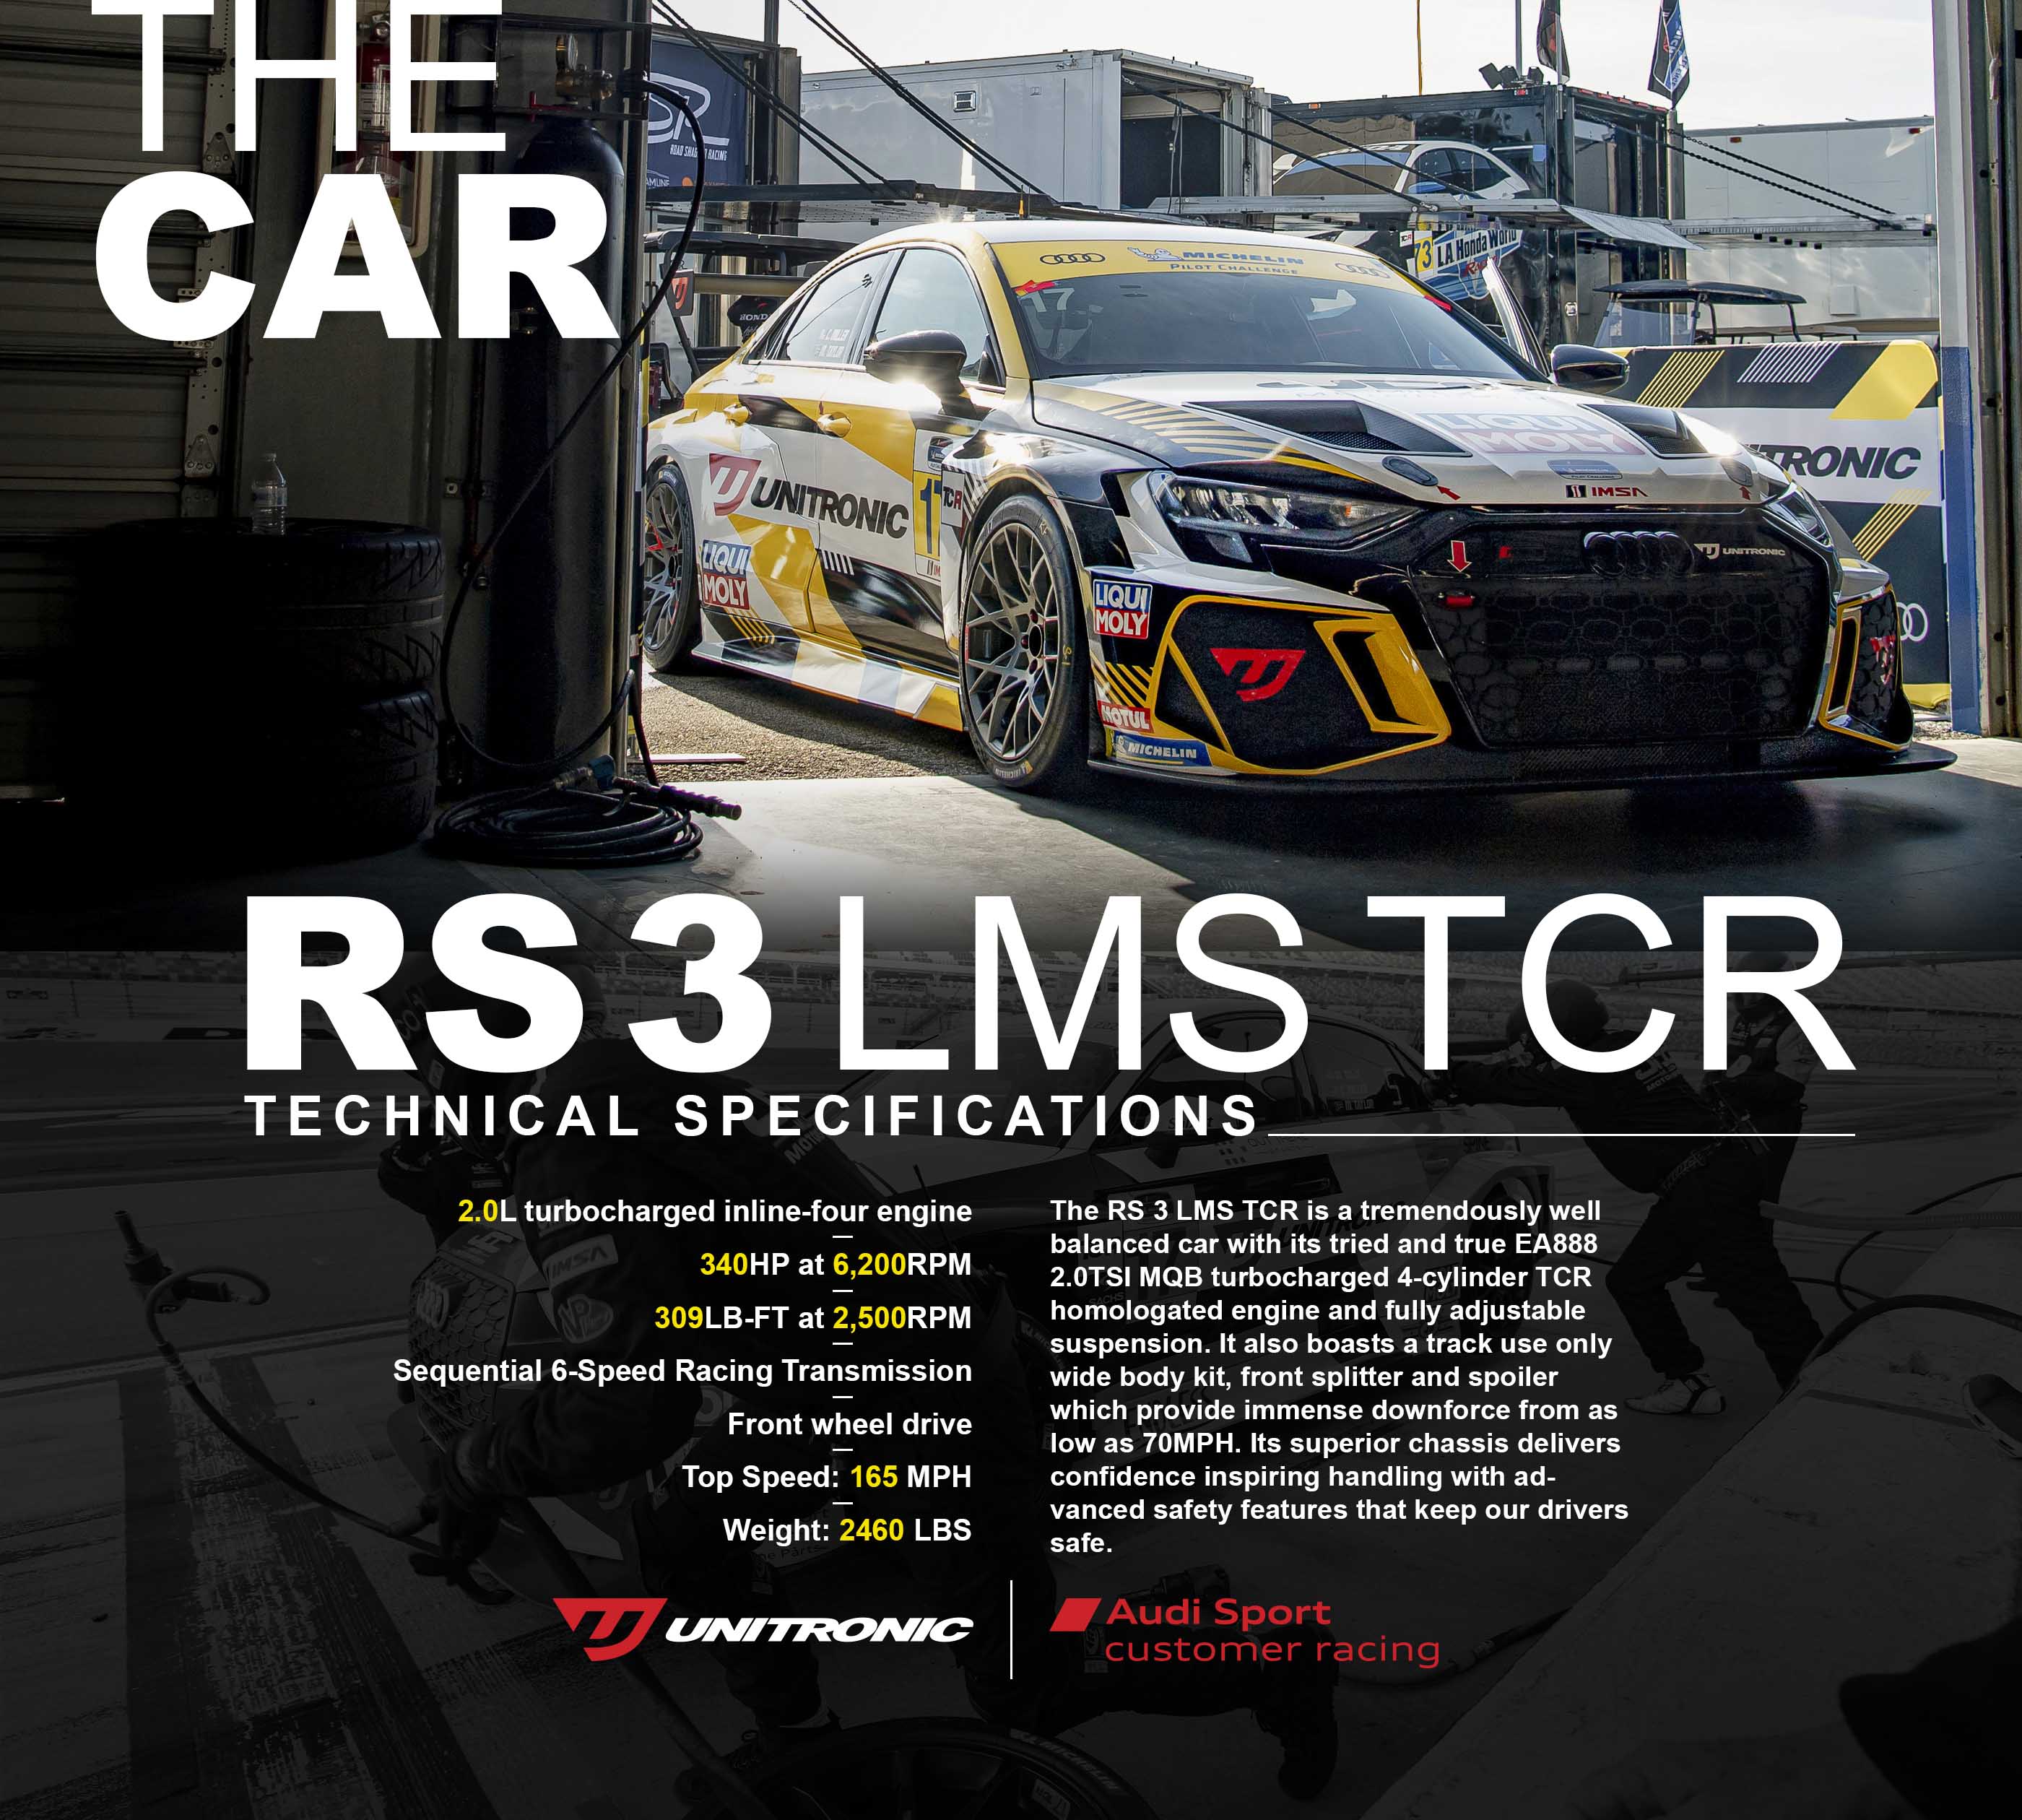 The RS 3 LMS TCR is a tremendously well balanced car with its tried and true EA888 2.0TSI MQB turbocharged 4-cylinder TCR homologated engine and fully adjustable suspension. It also boasts a track use only wide body kit, front splitter and spoiler which provide immense downforce from as low as 70MPH. Its superior chassis delivers confidence inspiring handling with advanced safety features that keep our drivers safe.